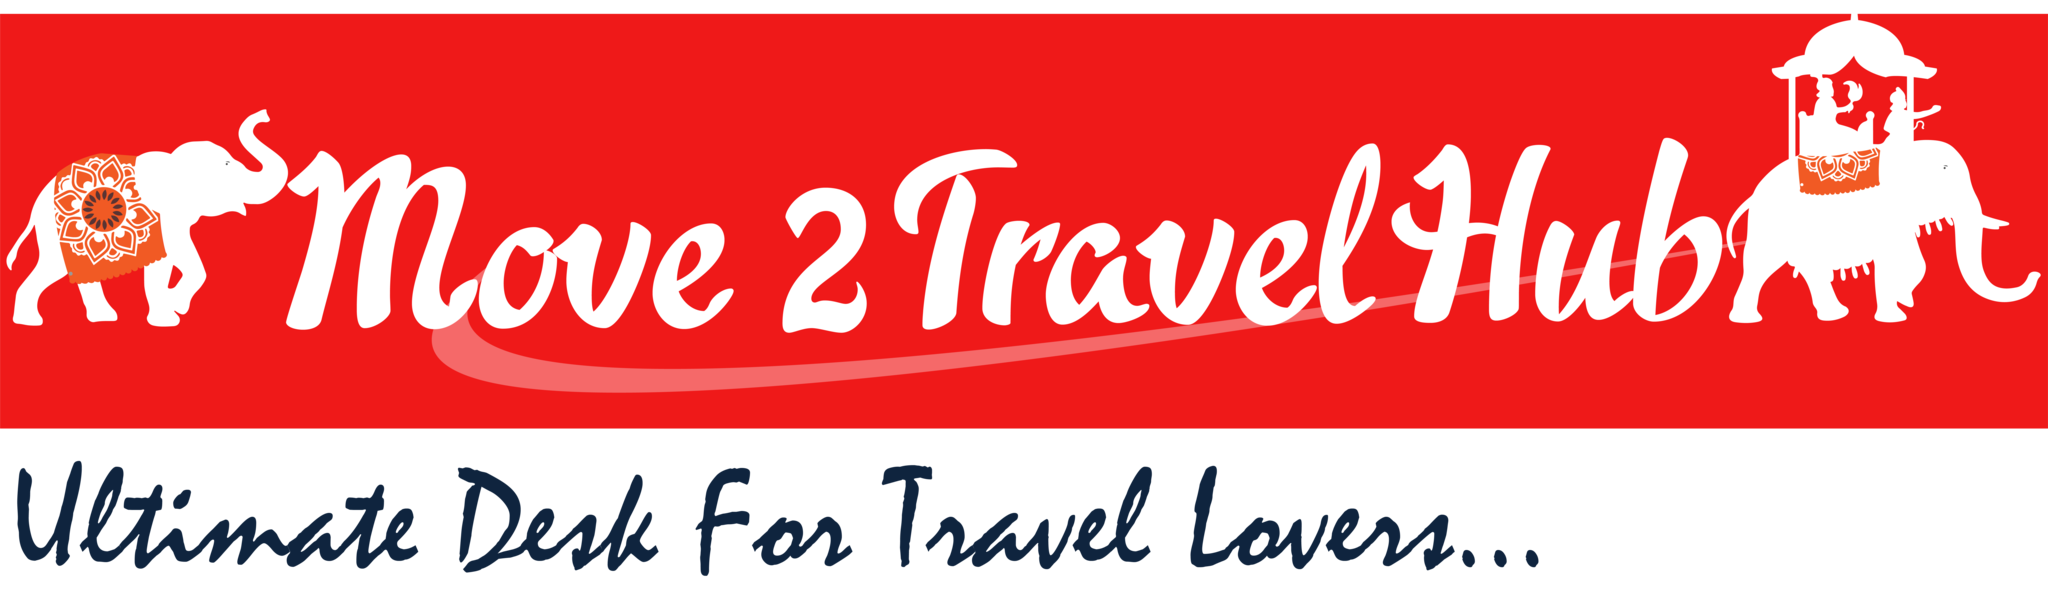 Cover Image of Move 2 Travel Hub Private Limited